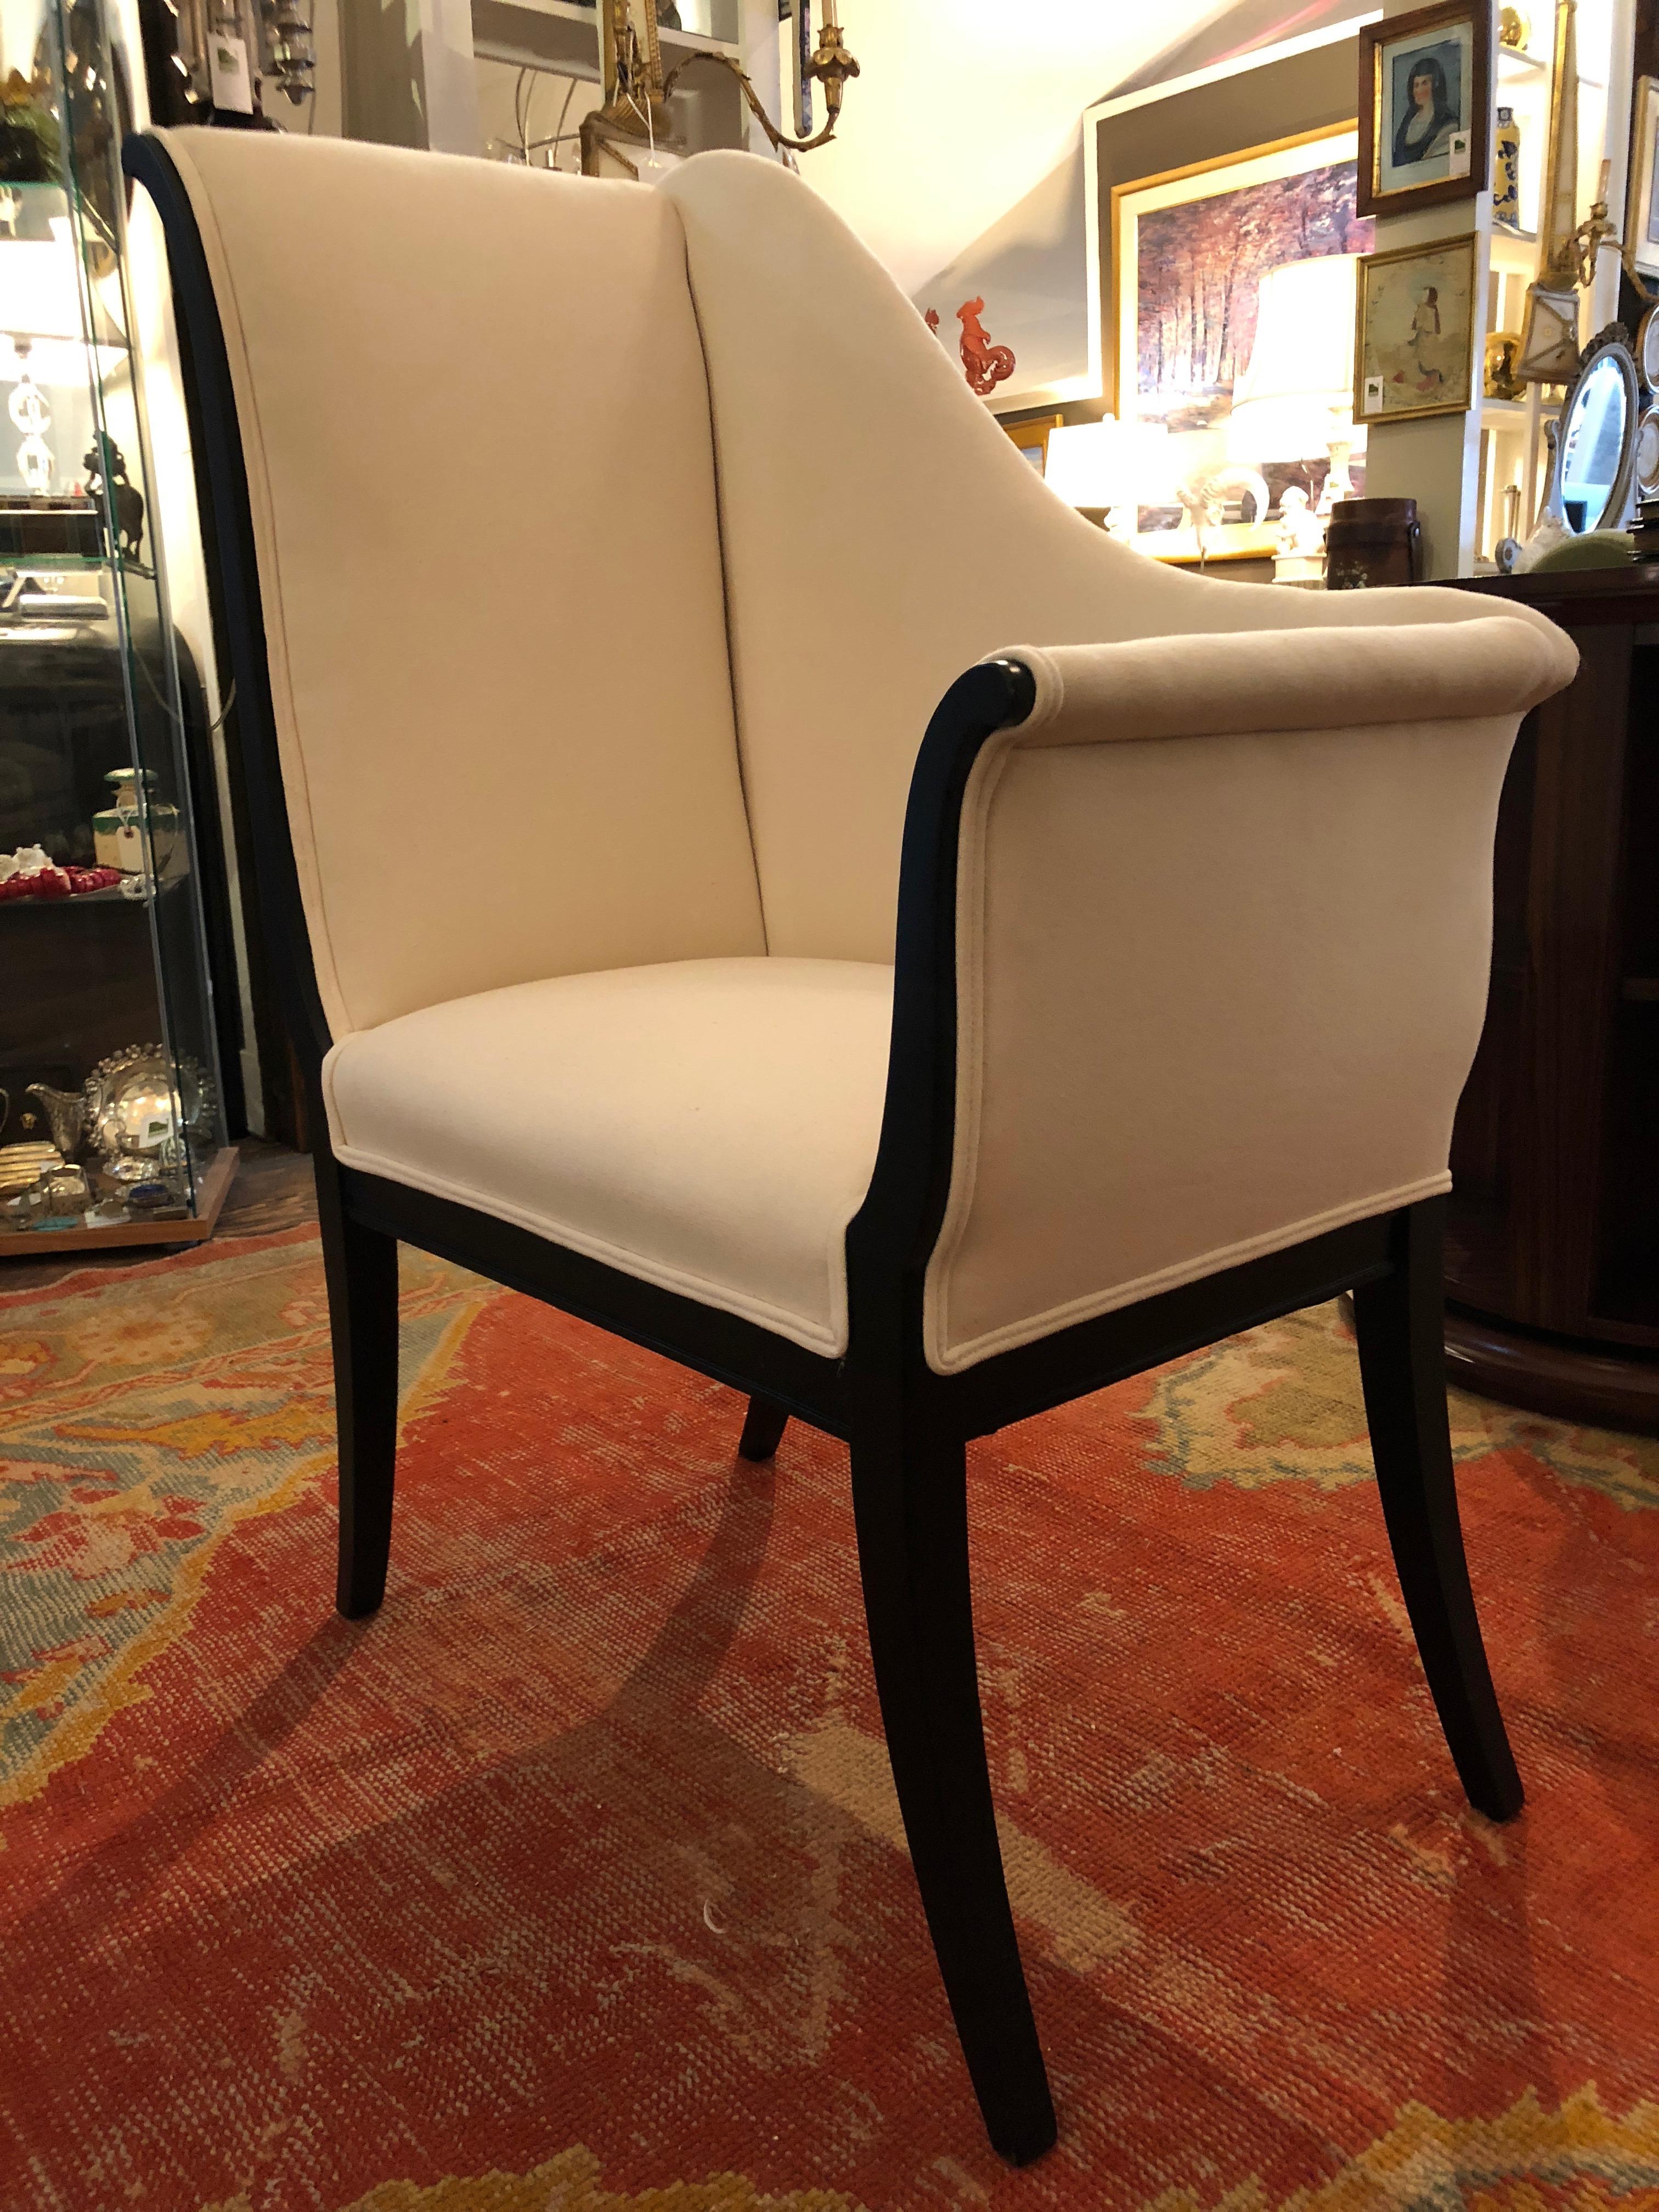 The show stealer chair in the room, a glamorous asymmetrical Recamier chair with elegant sloping back, 41.5 at the highest point and 27 at the arm. Ebonized graceful slightly splayed legs and new crisp white duck heavy gauge cotton upholstery.